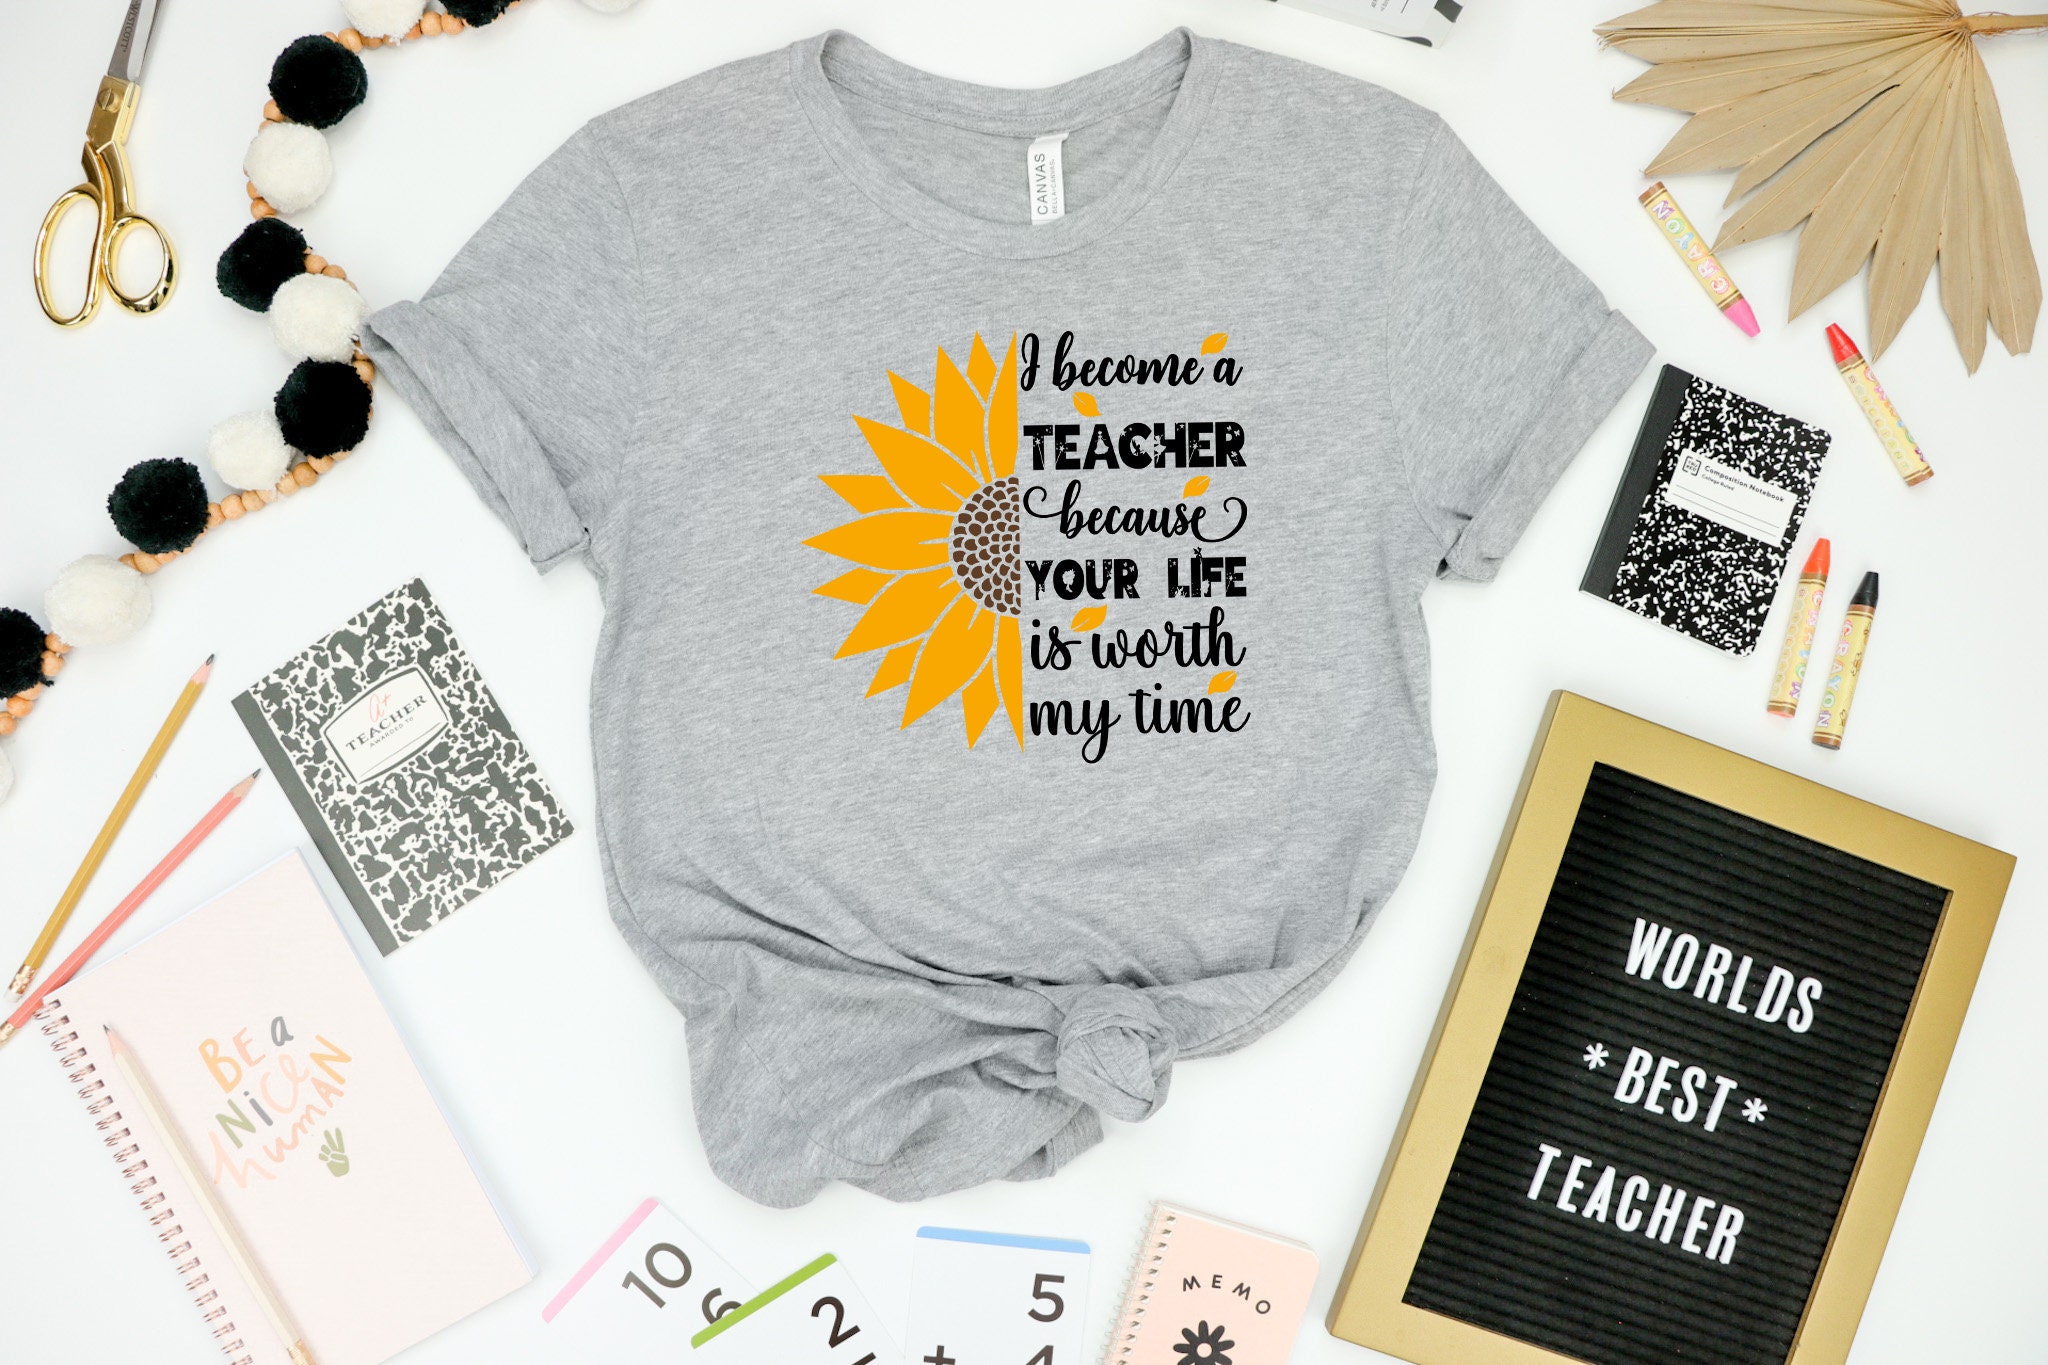 Discover I Become A Teacher Because Your Life Is Worth My Time Shirt, Teacher Sunflower Shirt, Teacher Shirt, Teacher Life Shirt, Teacher Day Shirt